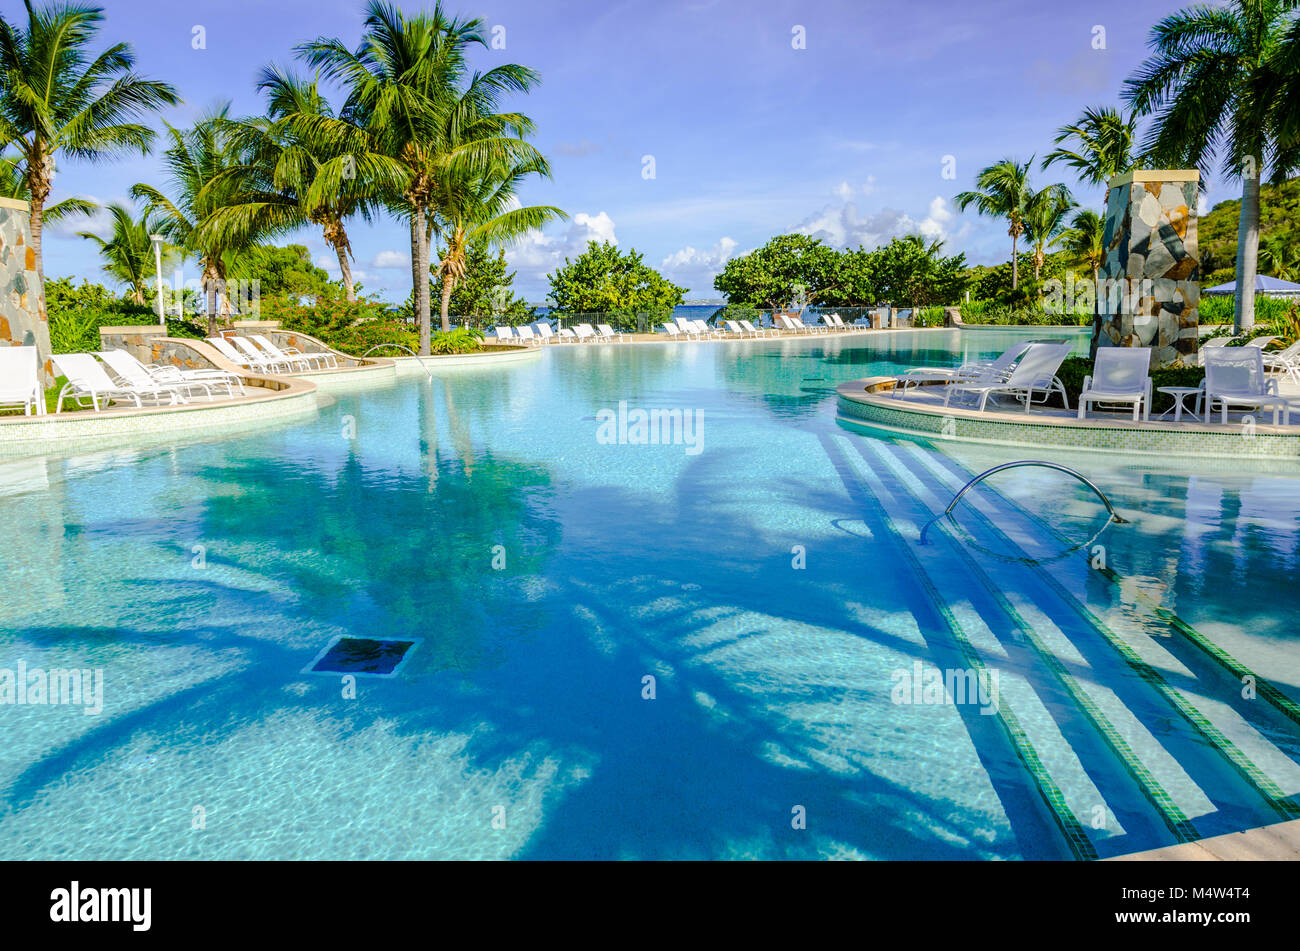 One of the Caribbean's largest, this huge pool fronts a white sand beach. The saltwater swimming pool is surrounded by white lounge chairs and tall pa Stock Photo